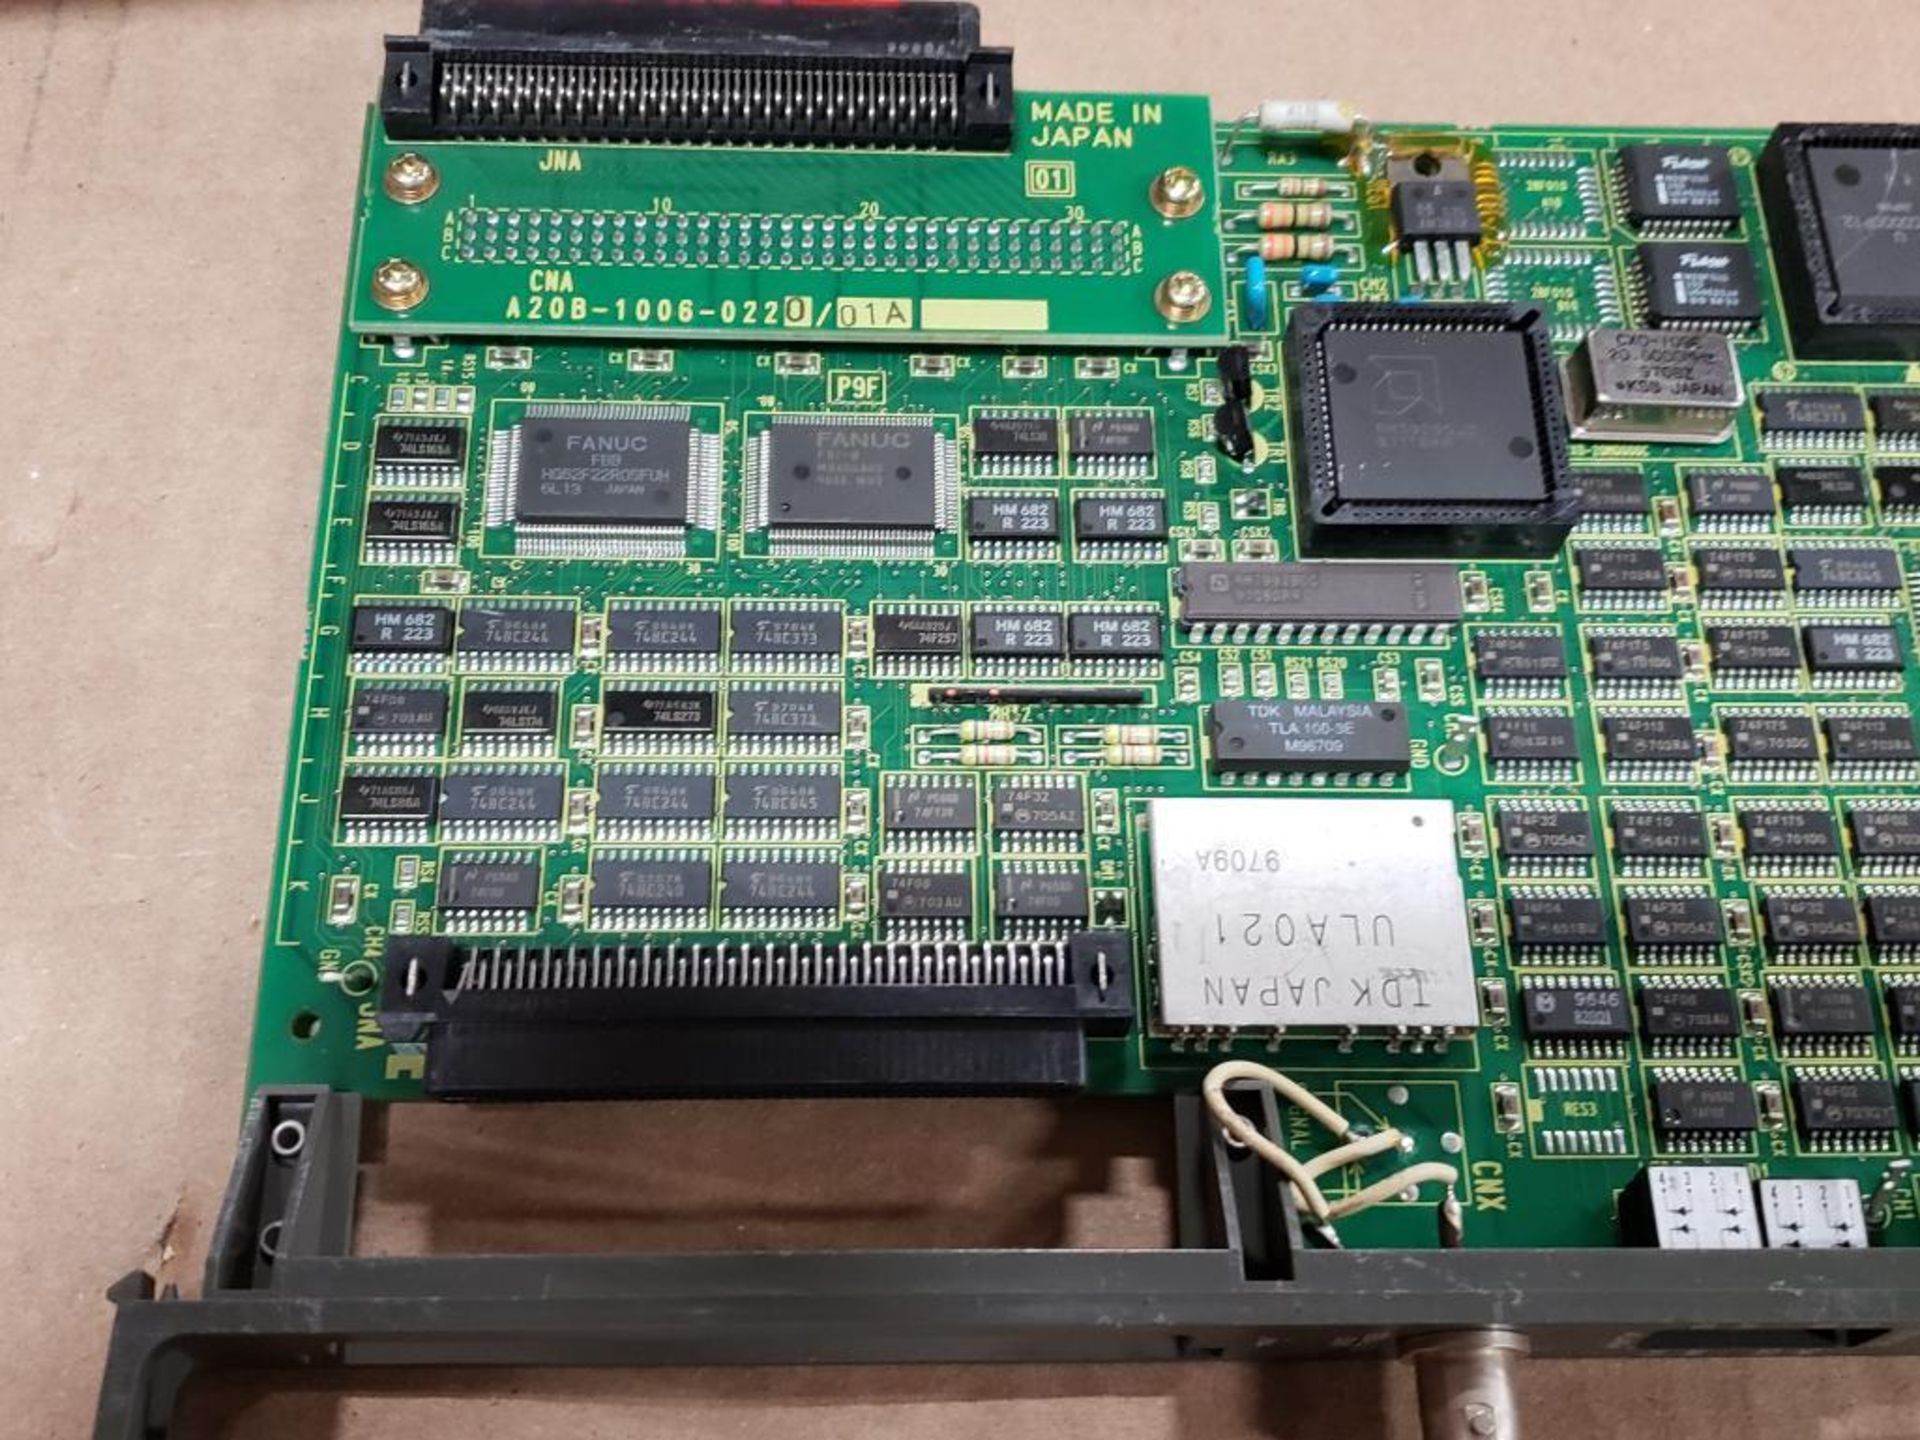 Fanuc control board. Part number A20B-8001-0120/04B. - Image 6 of 8